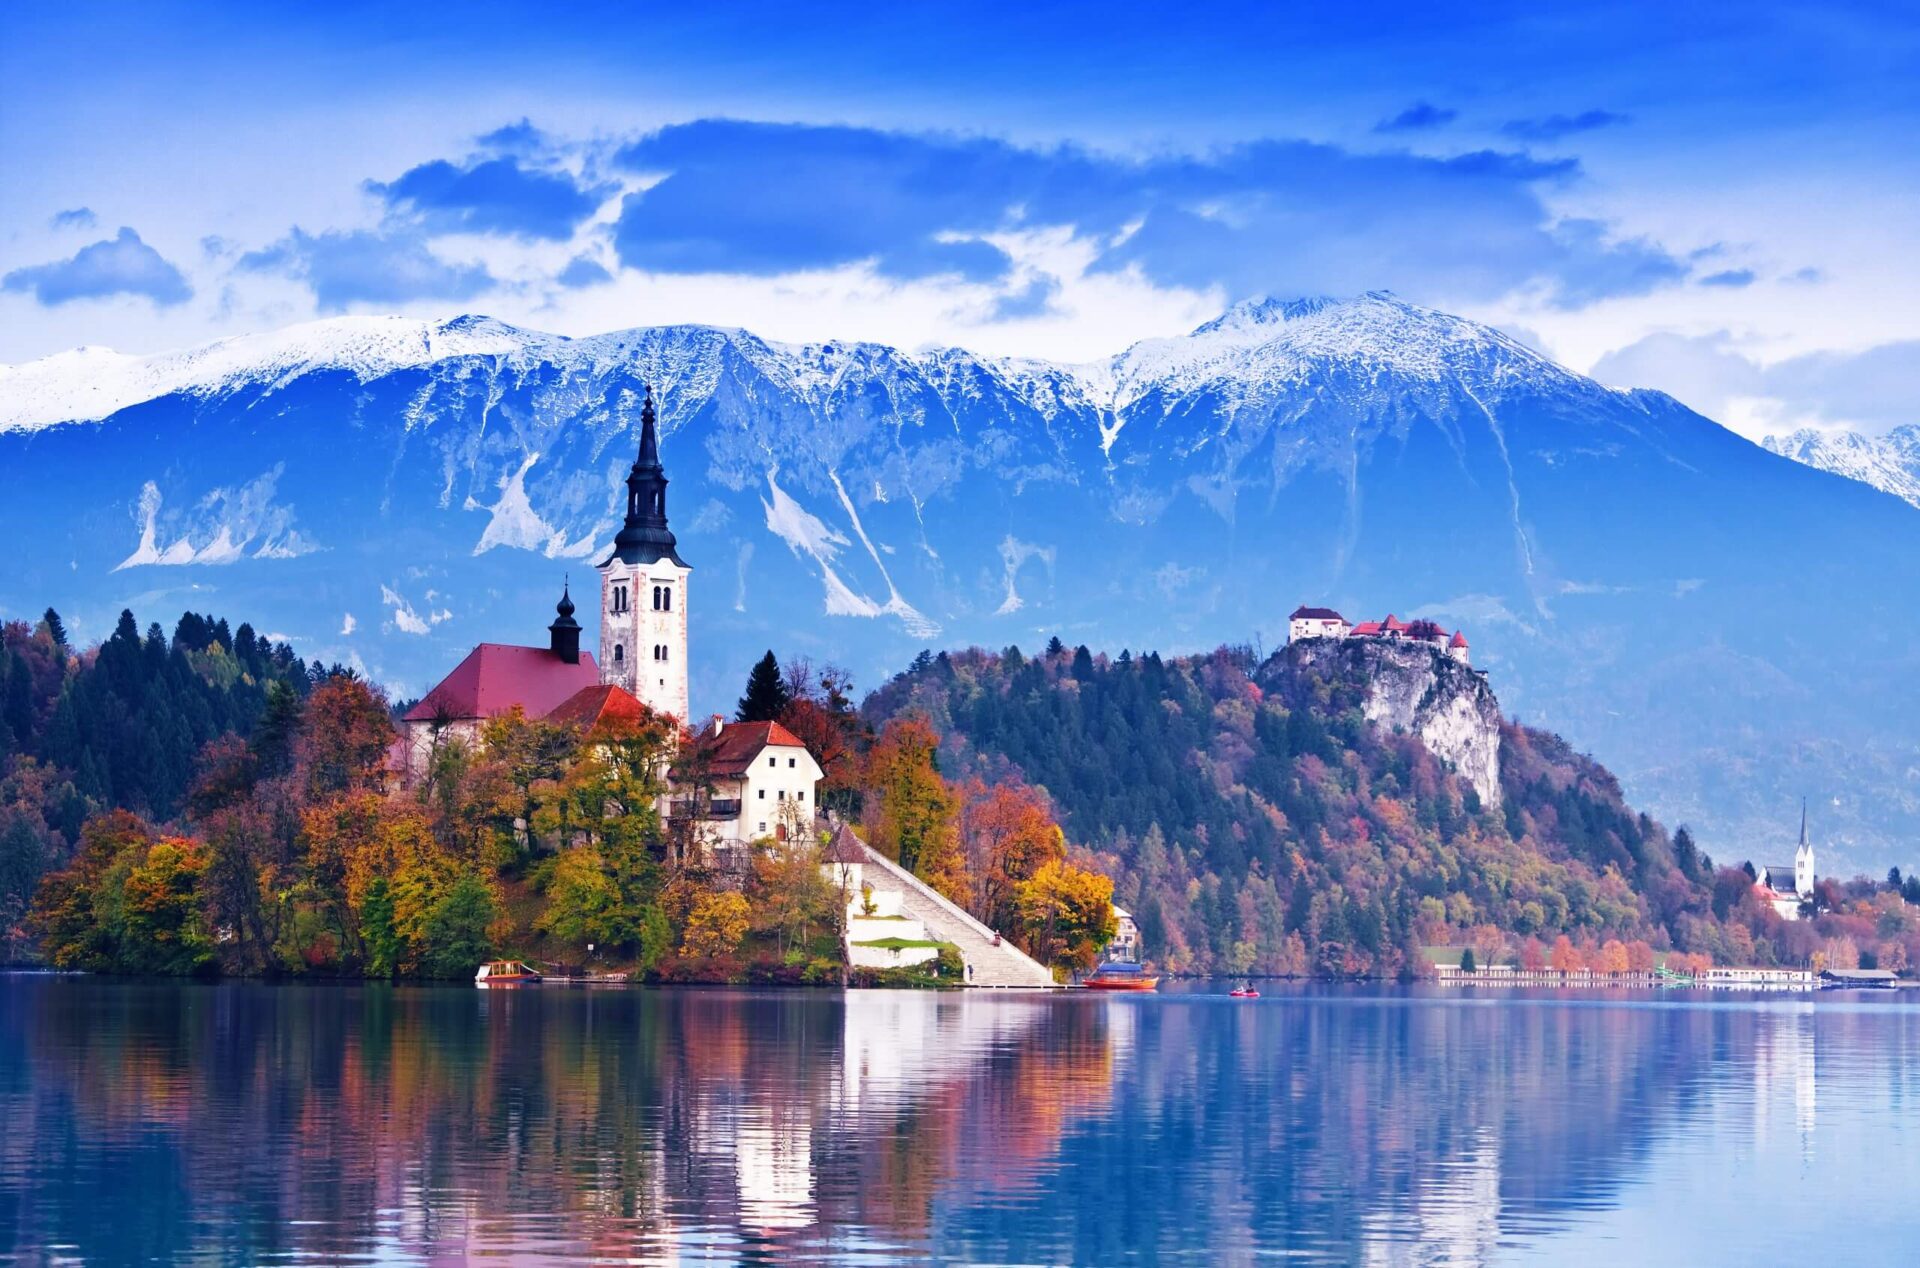 bled-with-lake-island-castle-and-mountains-in-background-slovenia-europe-stockpack-istock